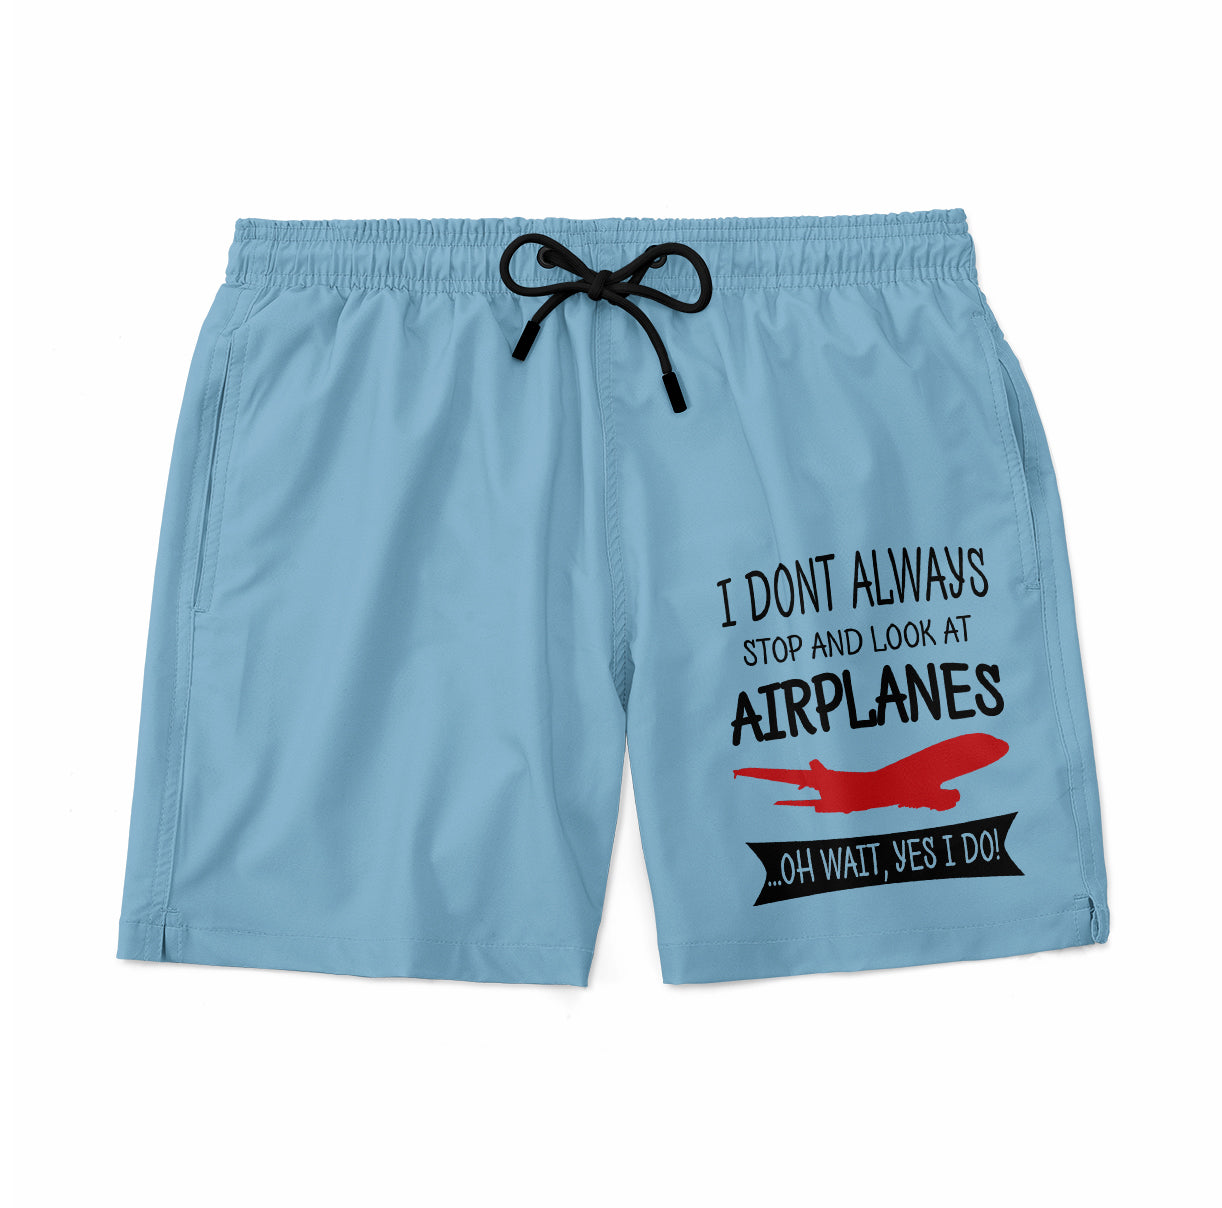 I Don't Always Stop and Look at Airplanes Designed Swim Trunks & Shorts